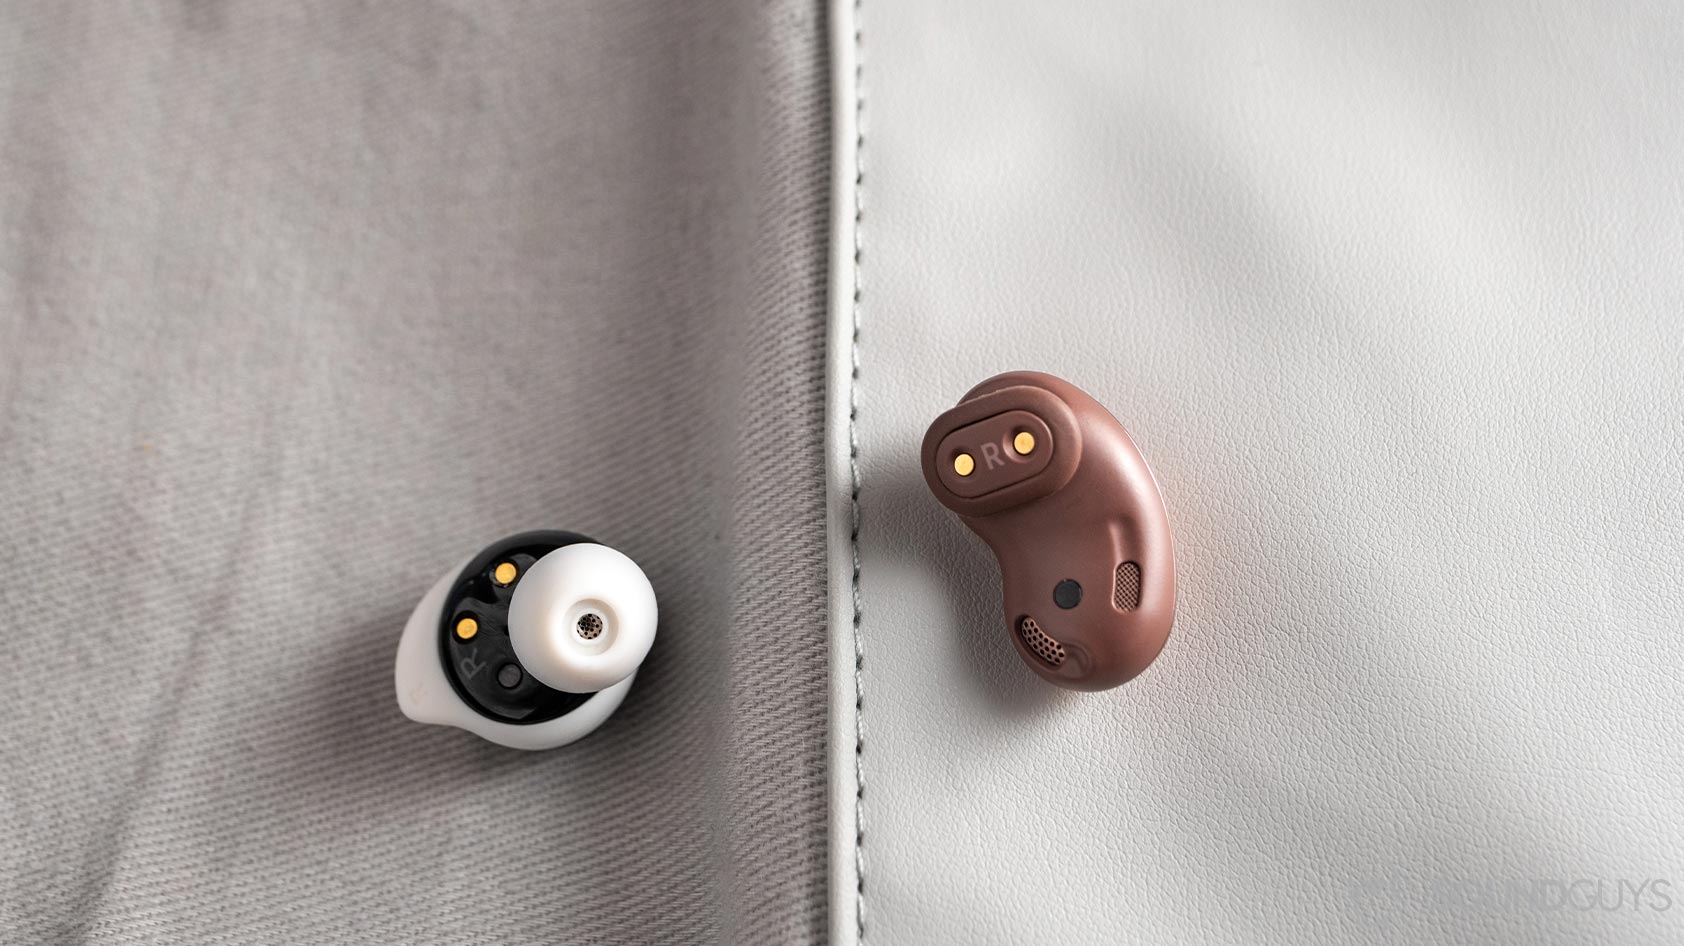 A picture of the Samsung Galaxy Buds Live noise canceling true wireless earbuds next to the Samsung Galaxy Buds Plus for the Samsung Galaxy Buds Plus vs Samsung Galaxy Buds Live comparison.